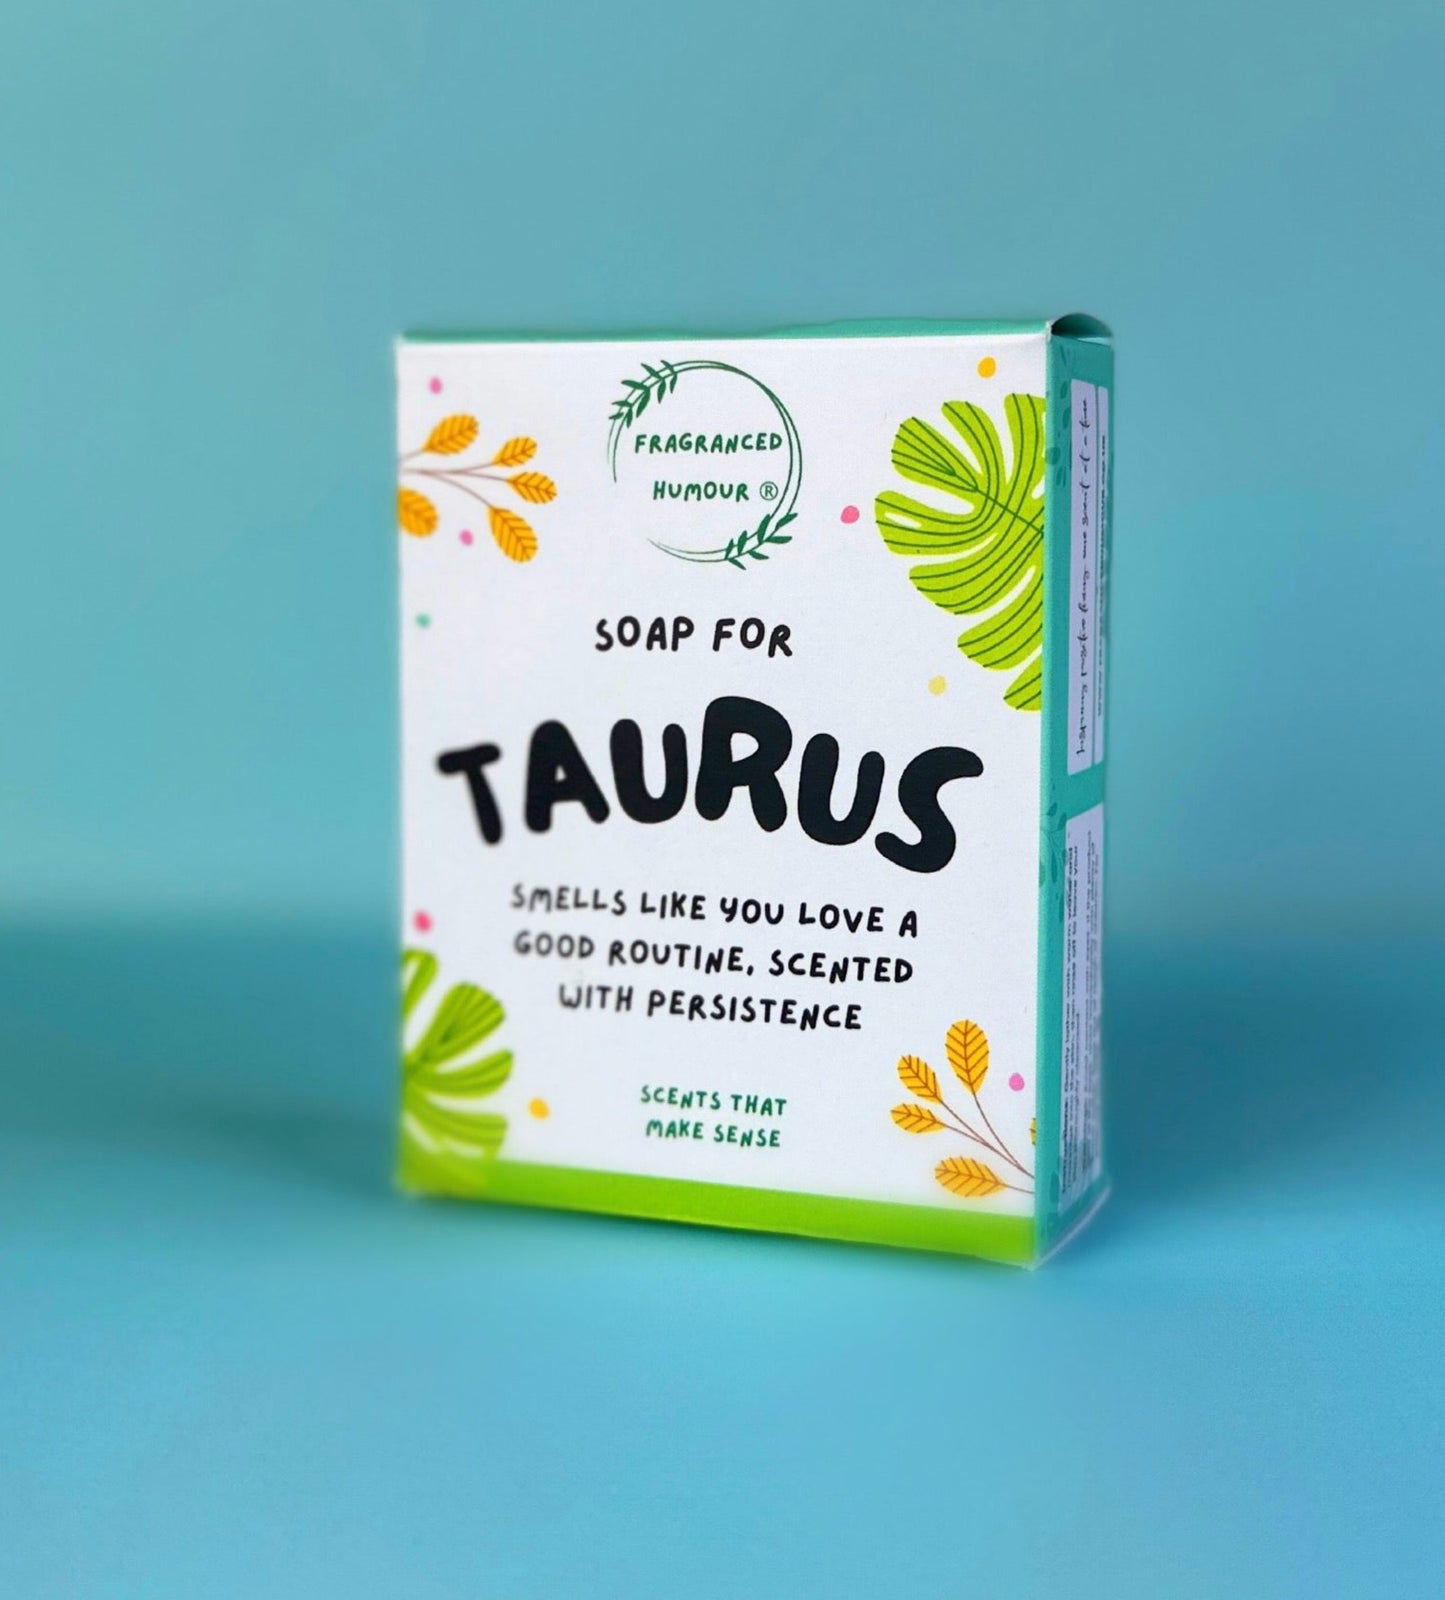 taurus birthday gift funny soap gift the text on the soap box reads soap for taurus smells like you love a good routine scented with persistence